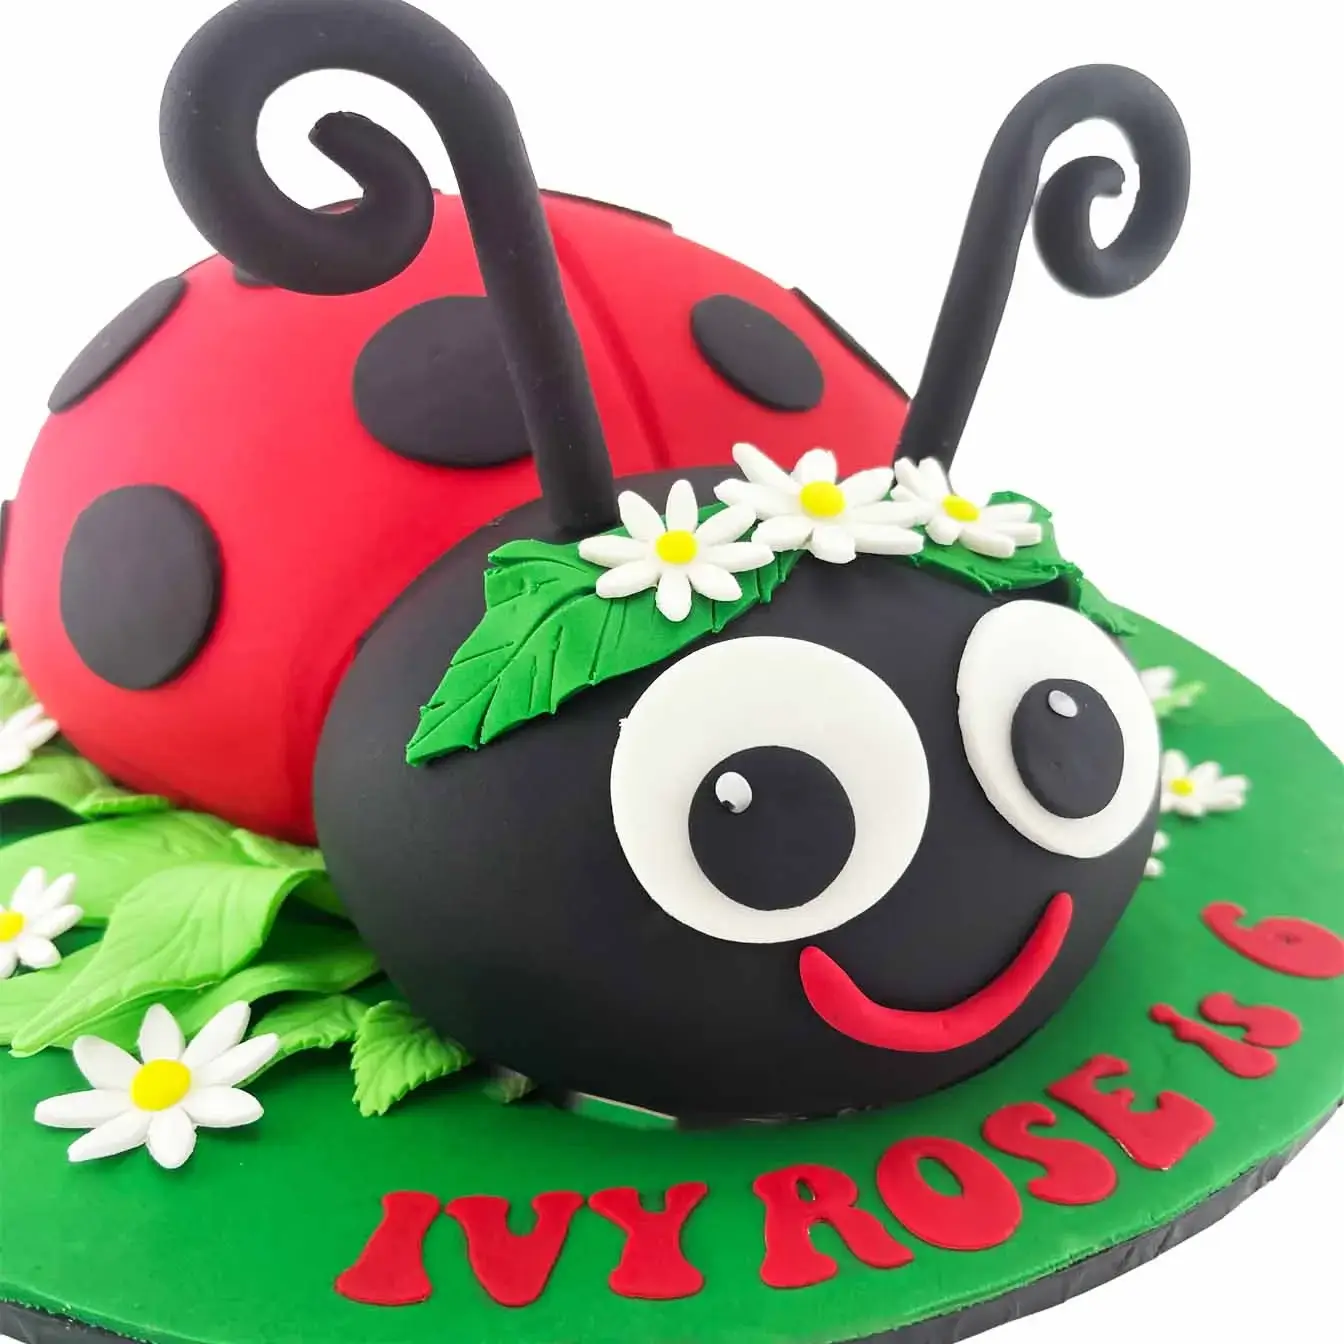 3D Ladybug Delight Cake - A cake with a lifelike 3D ladybug design, a charming centerpiece for celebrations filled with whimsy and happiness.